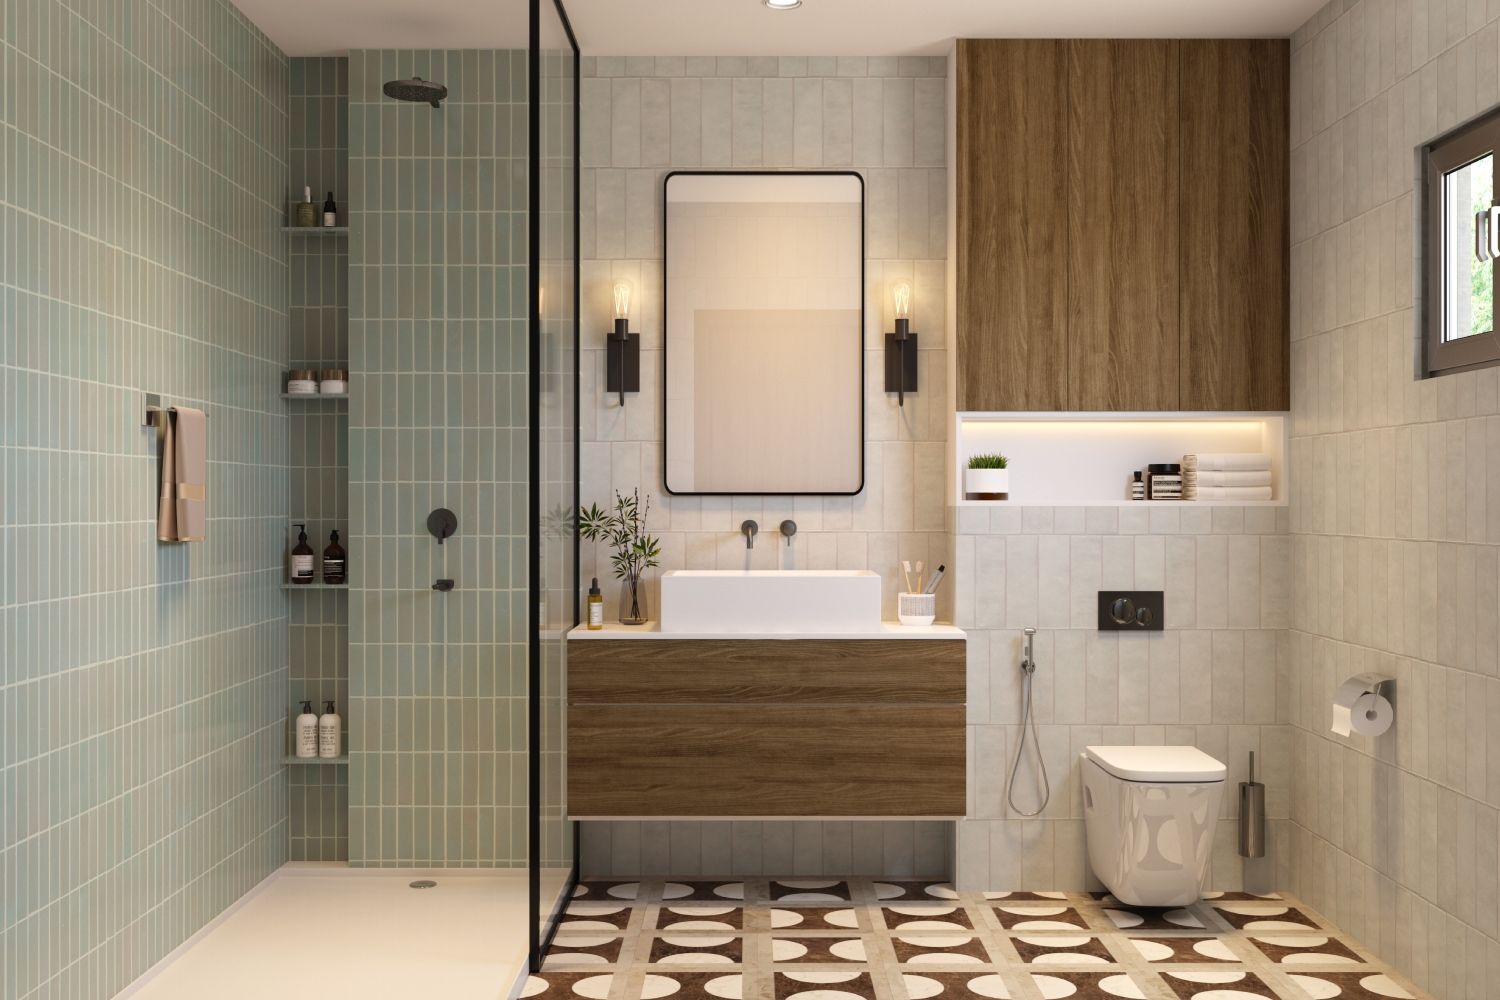 Contemporary Bathroom Design With Wall-Mounted Lights And Mirror